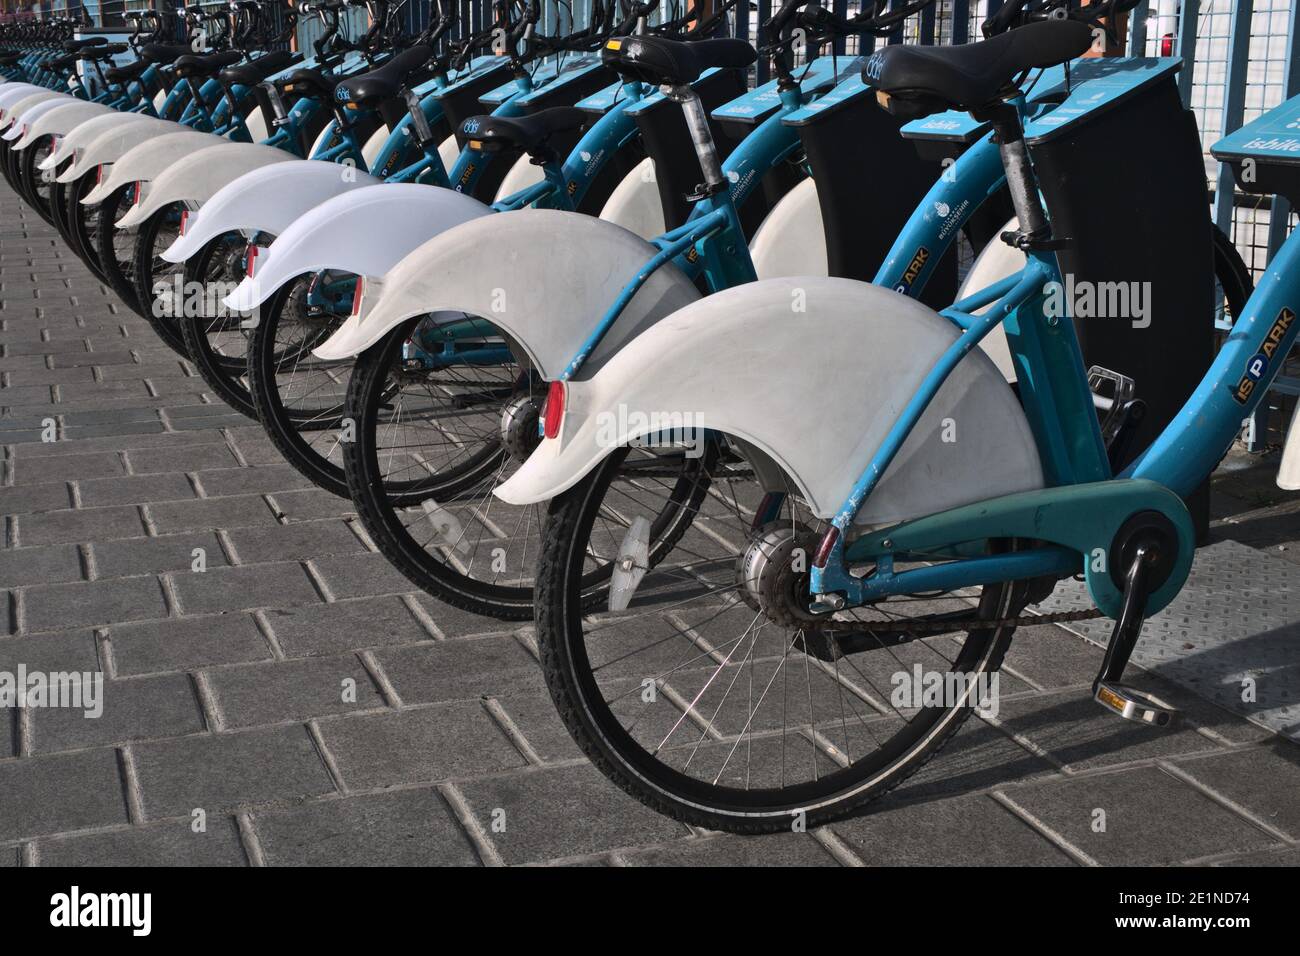 A group of many parked bicycle's in a profiled view. Stock Photo